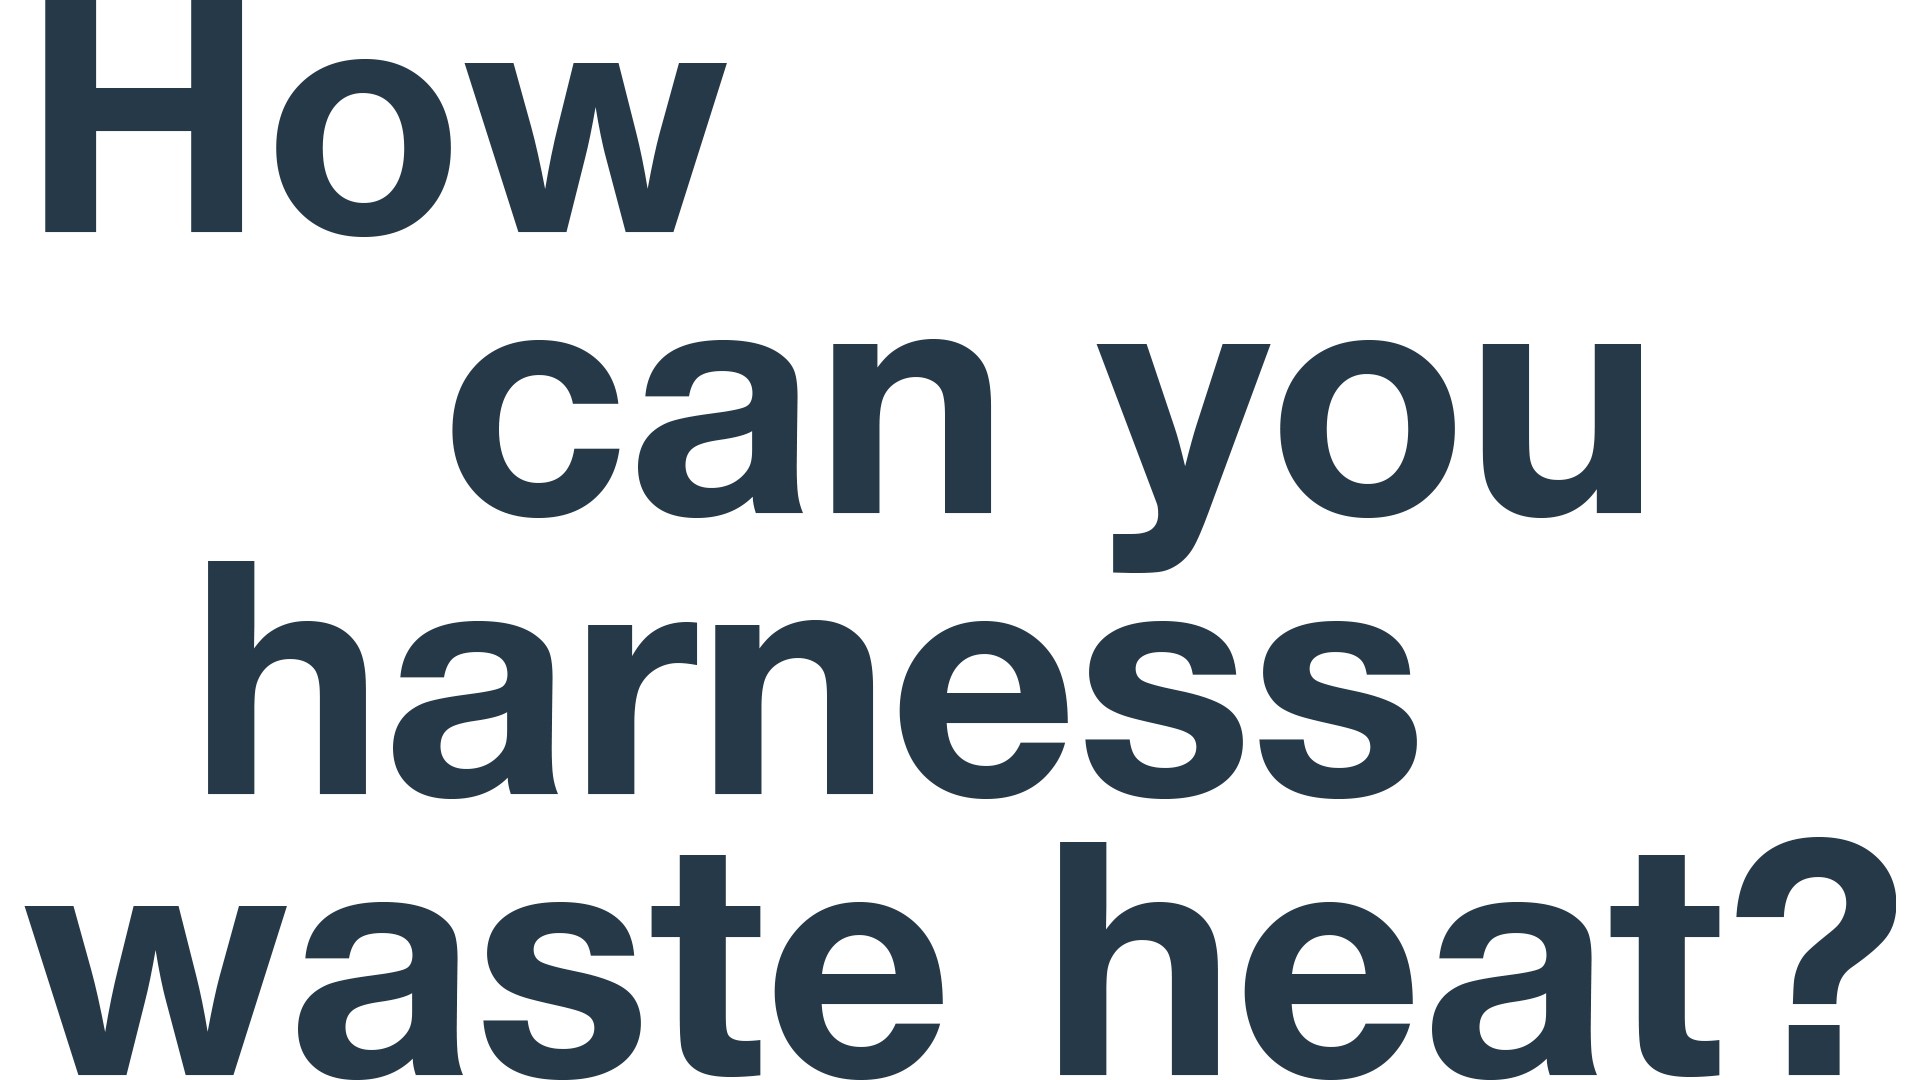 How can you harness waste heat